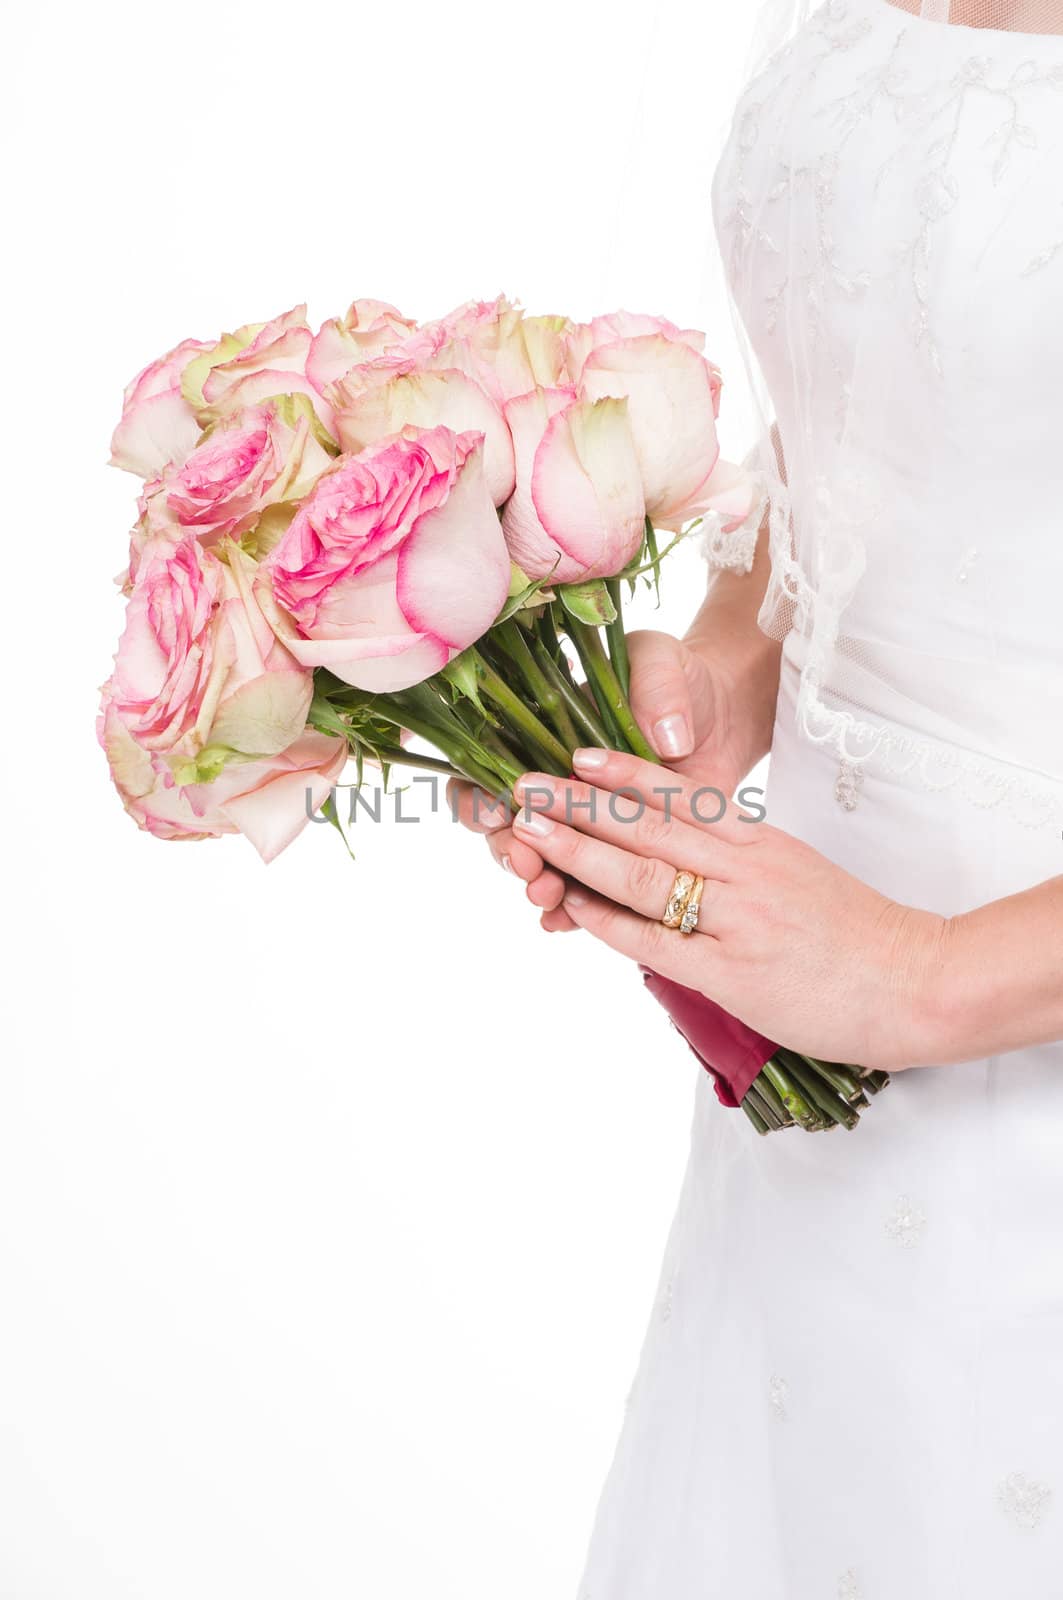 Young bride holding a bouquet on isolated white background. by Shane9